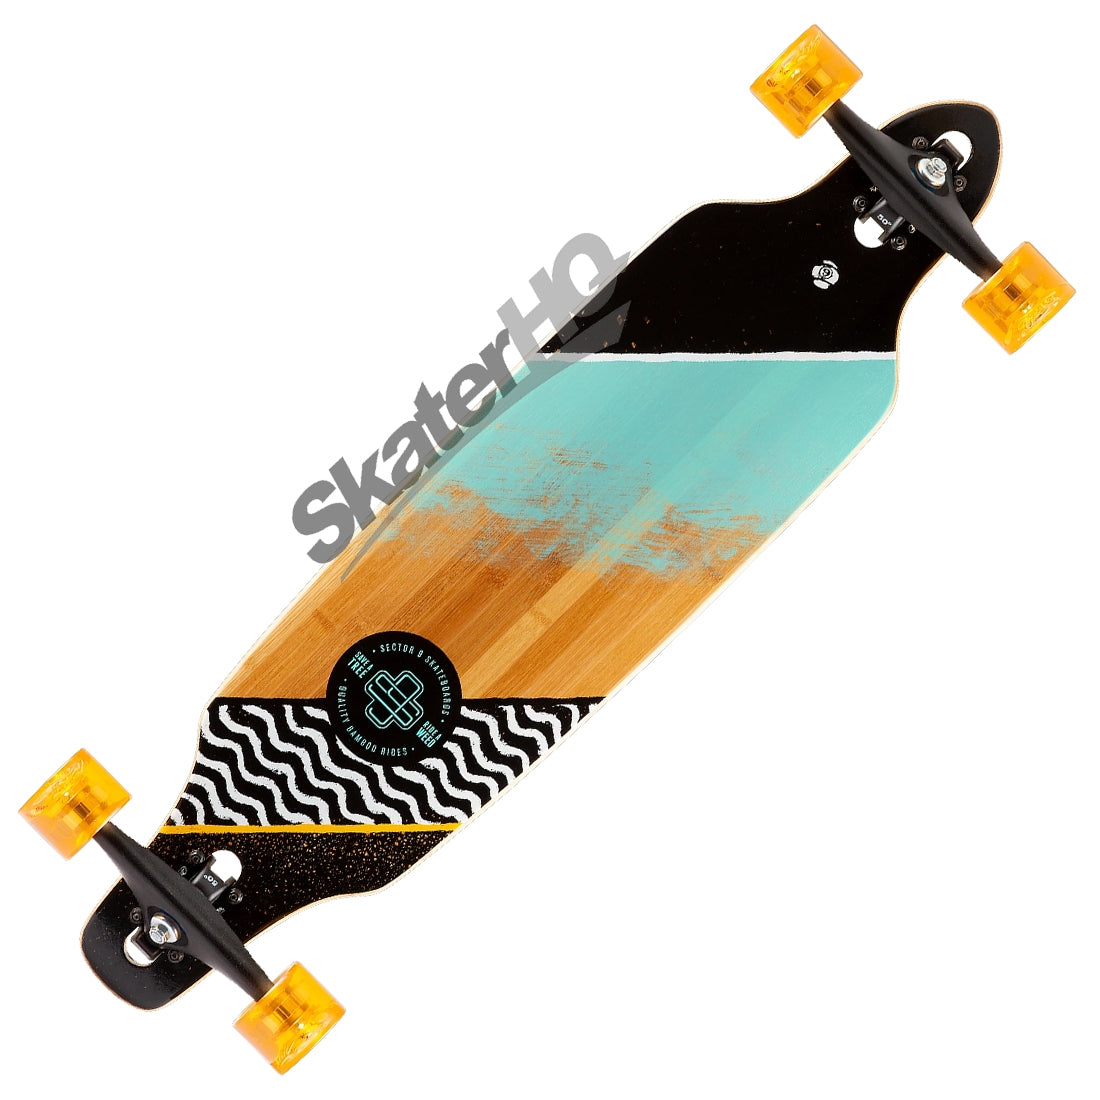 Sector 9 Flow Mini Lookout 37.5 Complete - Bamboo/Yellow Skateboard Completes Longboards